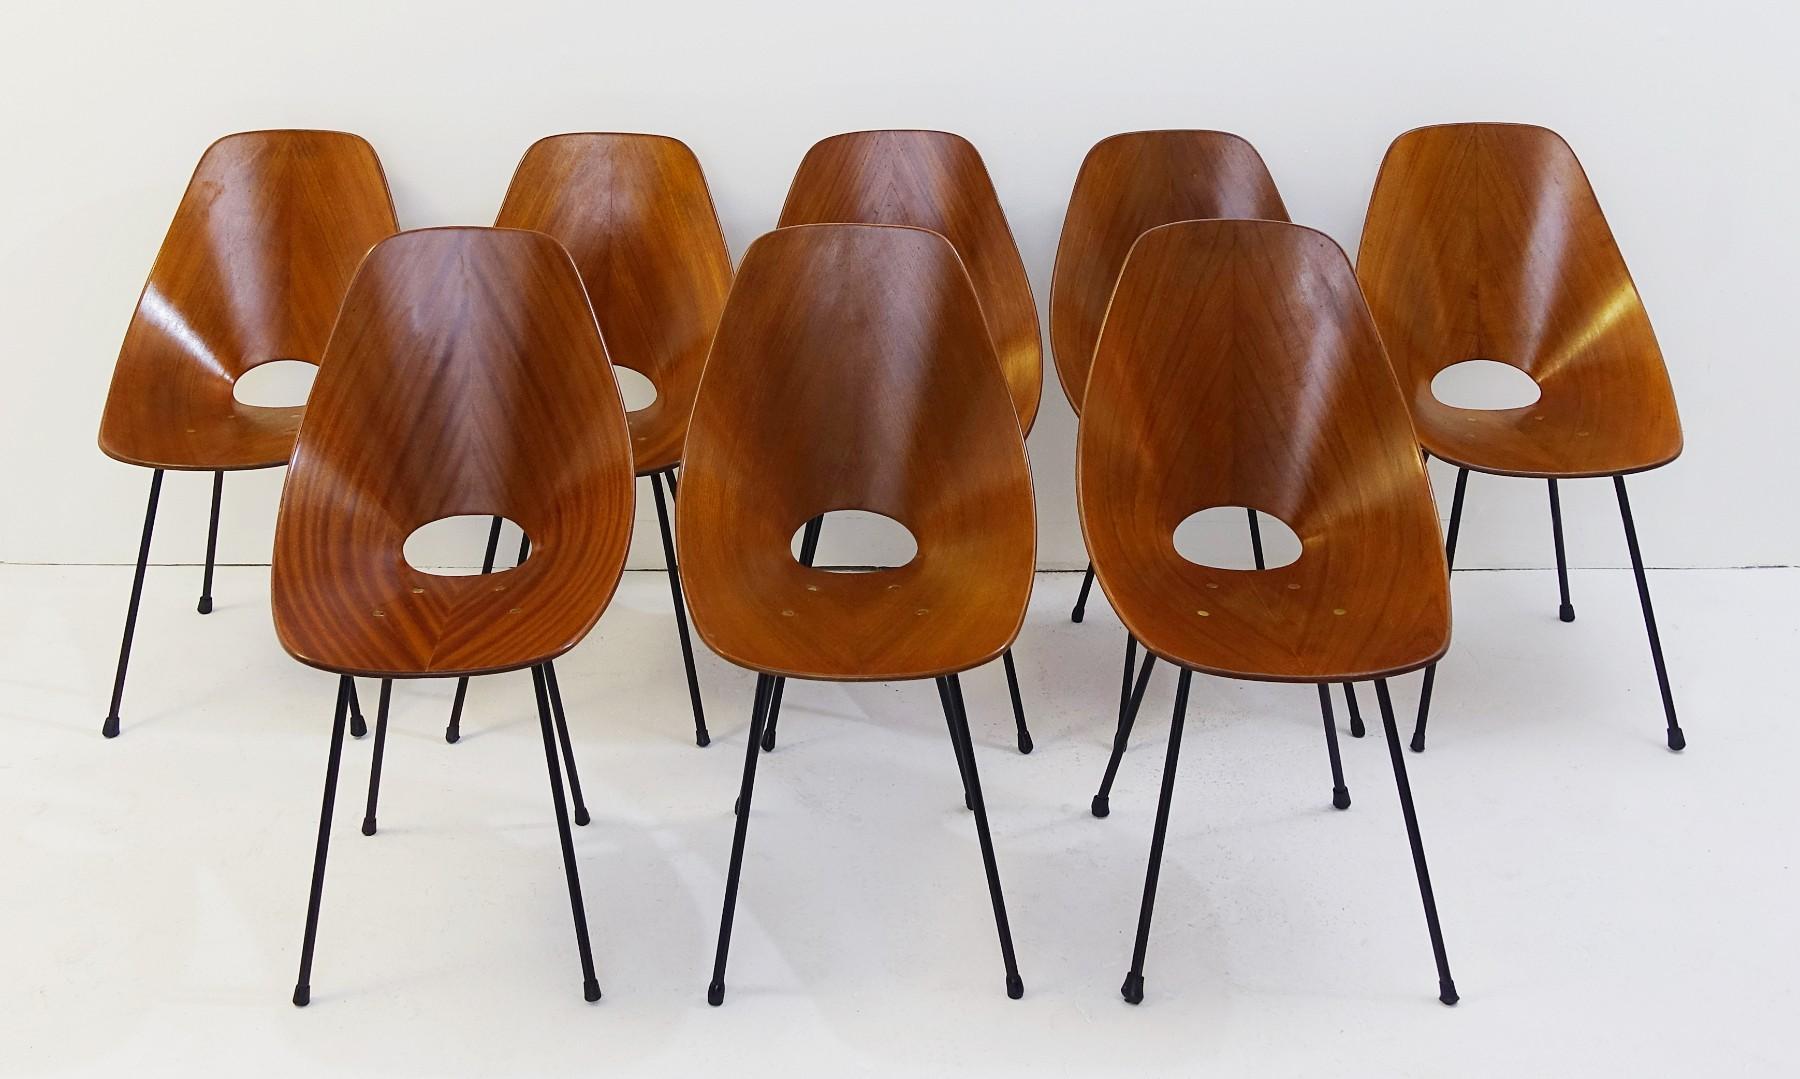 Set of eight Medea chairs by Vittorio Nobili for Fratelli Tagliabue, Italy, 1955.